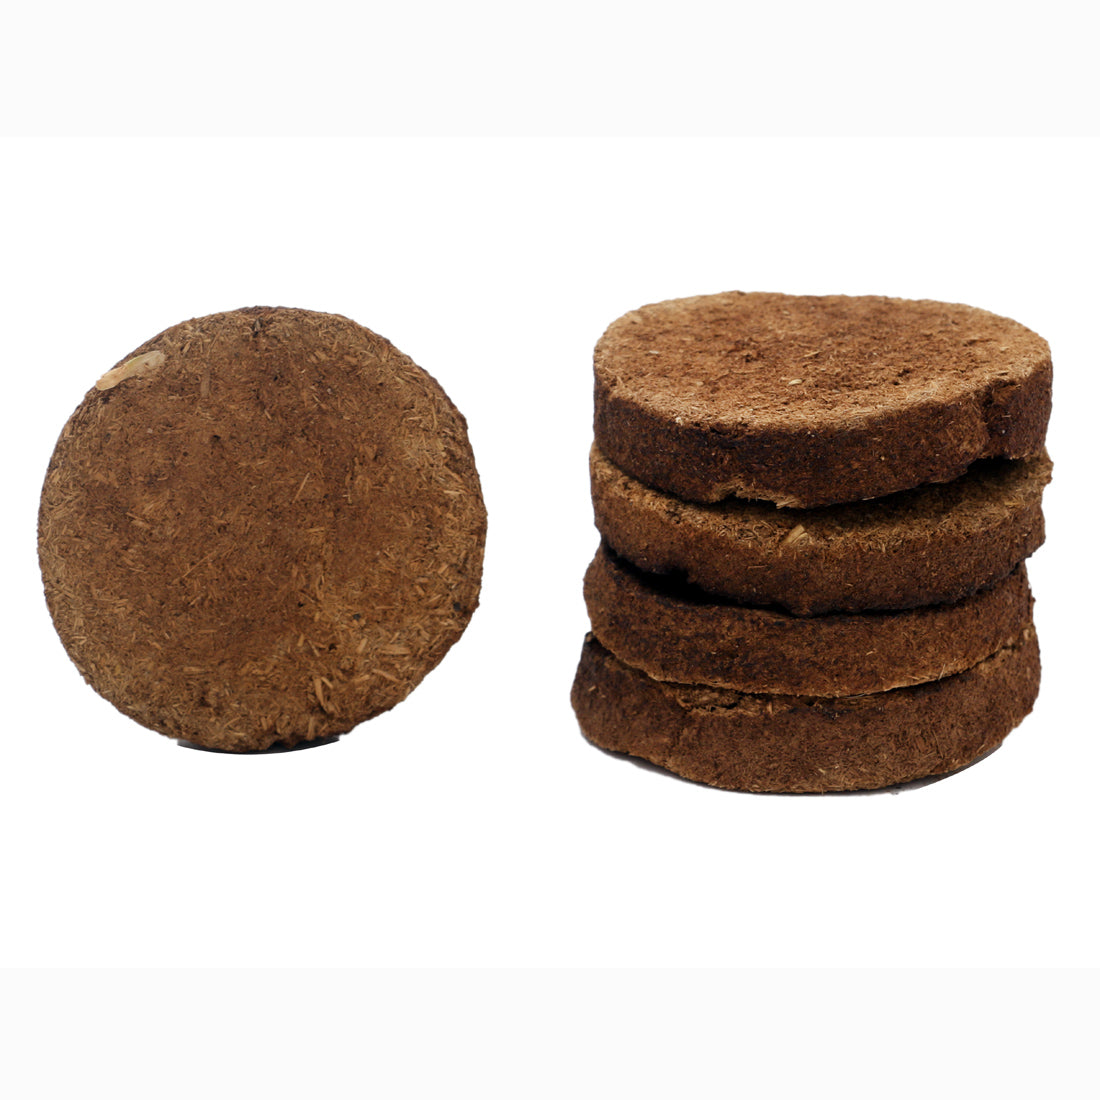 Amazon customer buys cow dung cakes online; complains 'It tastes muddy, not  crunchy'